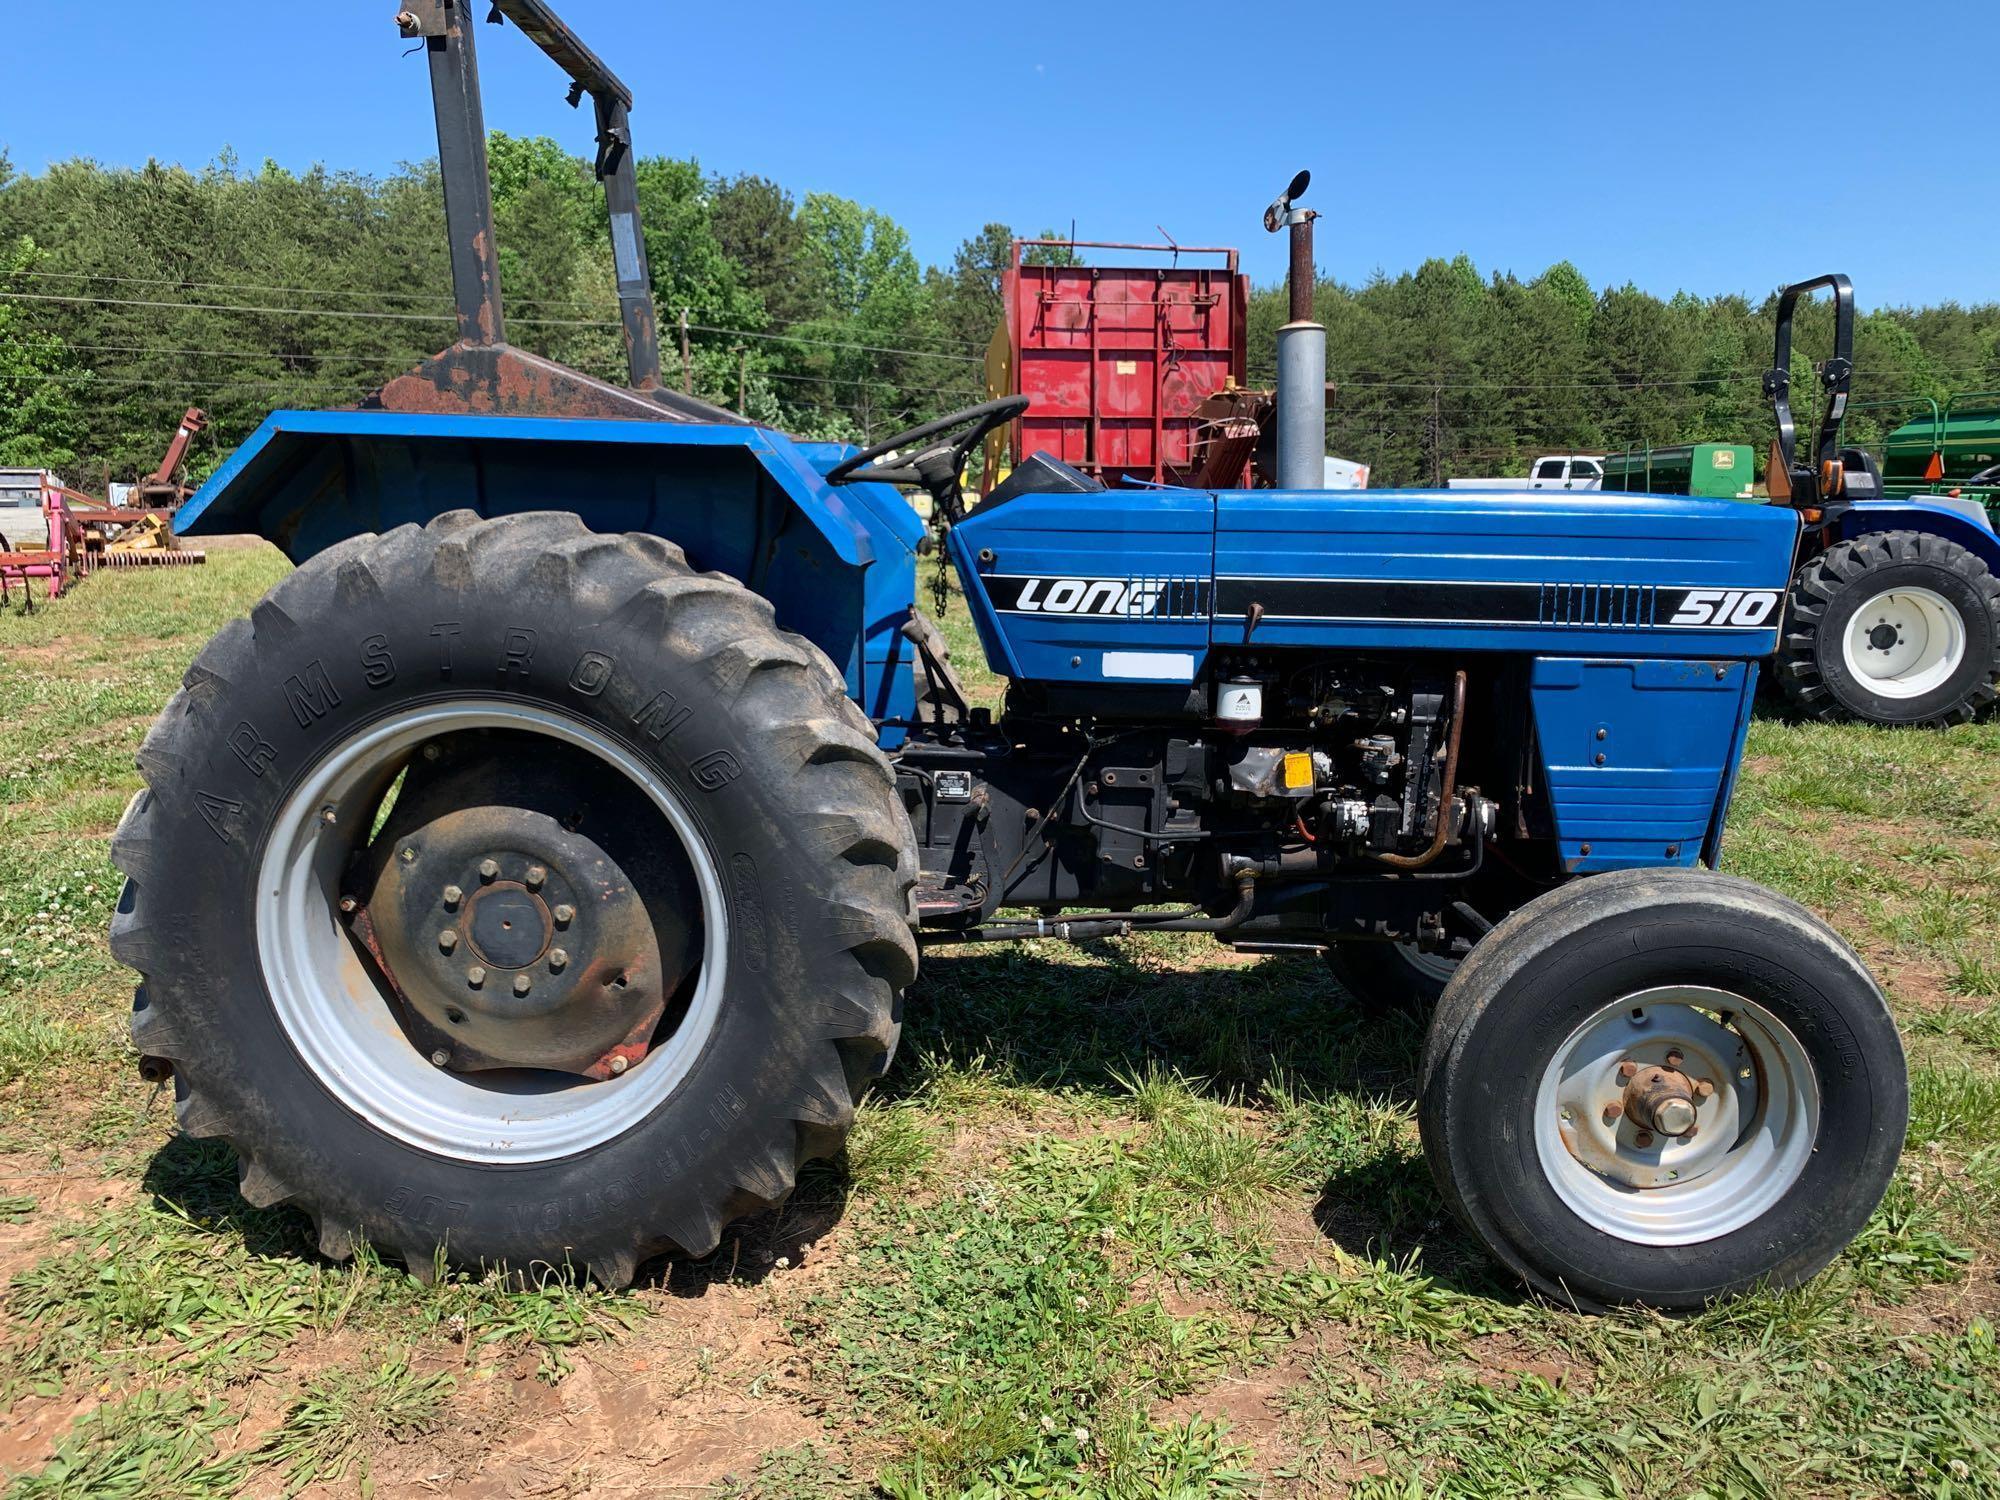 Long 510 Tractor